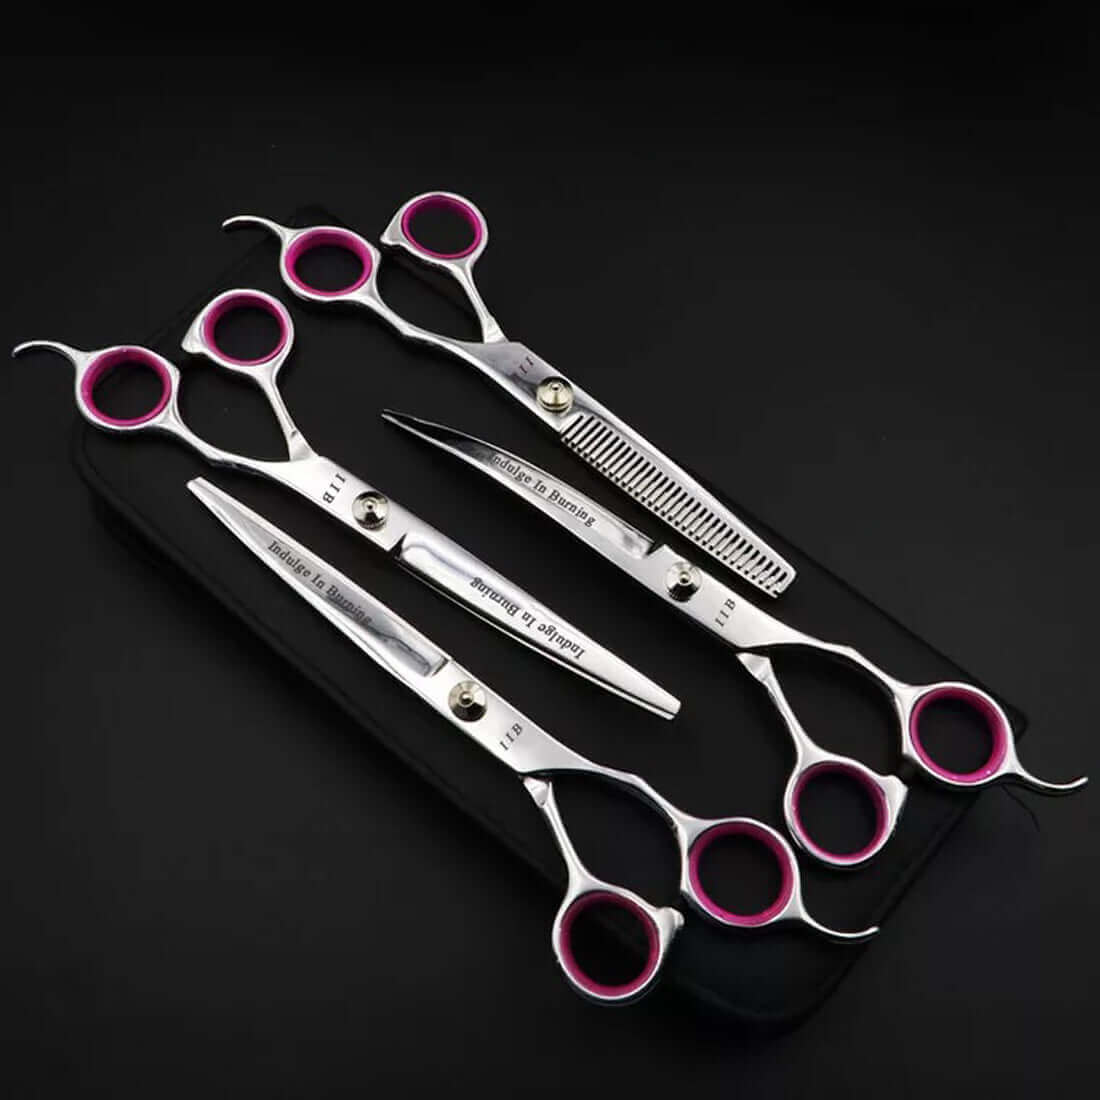 7 Inch, 4 Pcs/ Set 4CR Stainless Steel Heavy Duty Titanium Coated Pet Grooming Scissors Kit ,Safety Round Tip- Thinning, Straight, Curved Shears for Long Short Hair for Dog/Cat, Dog Scissor, Dog Grooming Kit, Scissor for Dog Hair Cutting-Grooming-kutkutstyle